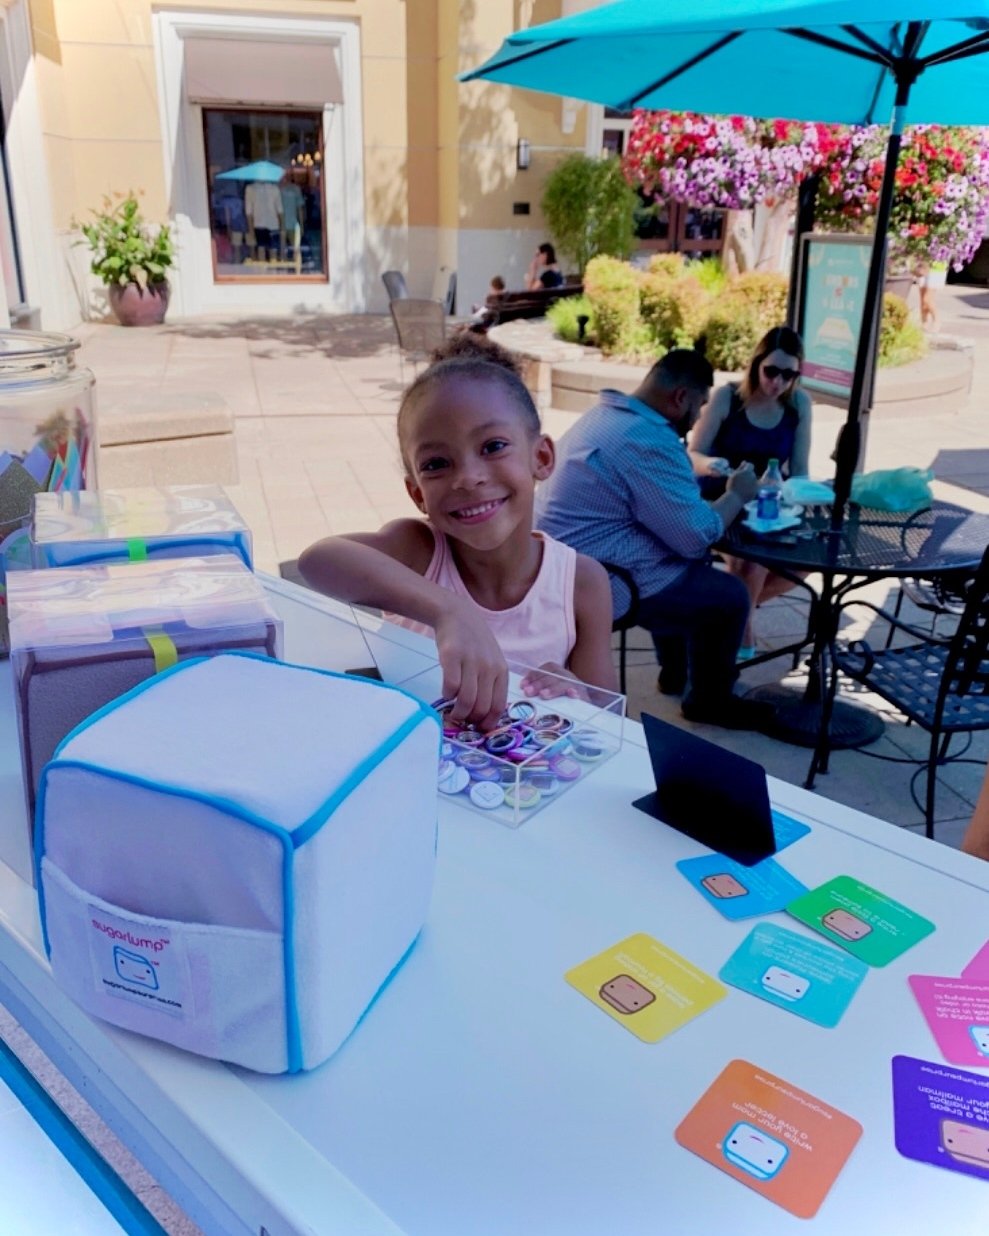 This CUTIE stopped to say hi and grab some sugarlump merch. We love meeting the children we serve, and they love us!!!!

🩵 #sugarlump
🩵 #sugarlumplove
🩵 #sugarlumpchallenge 
🩵 #actsofkindness 
🩵 #childrenstoys 
🩵 #kindnesskit